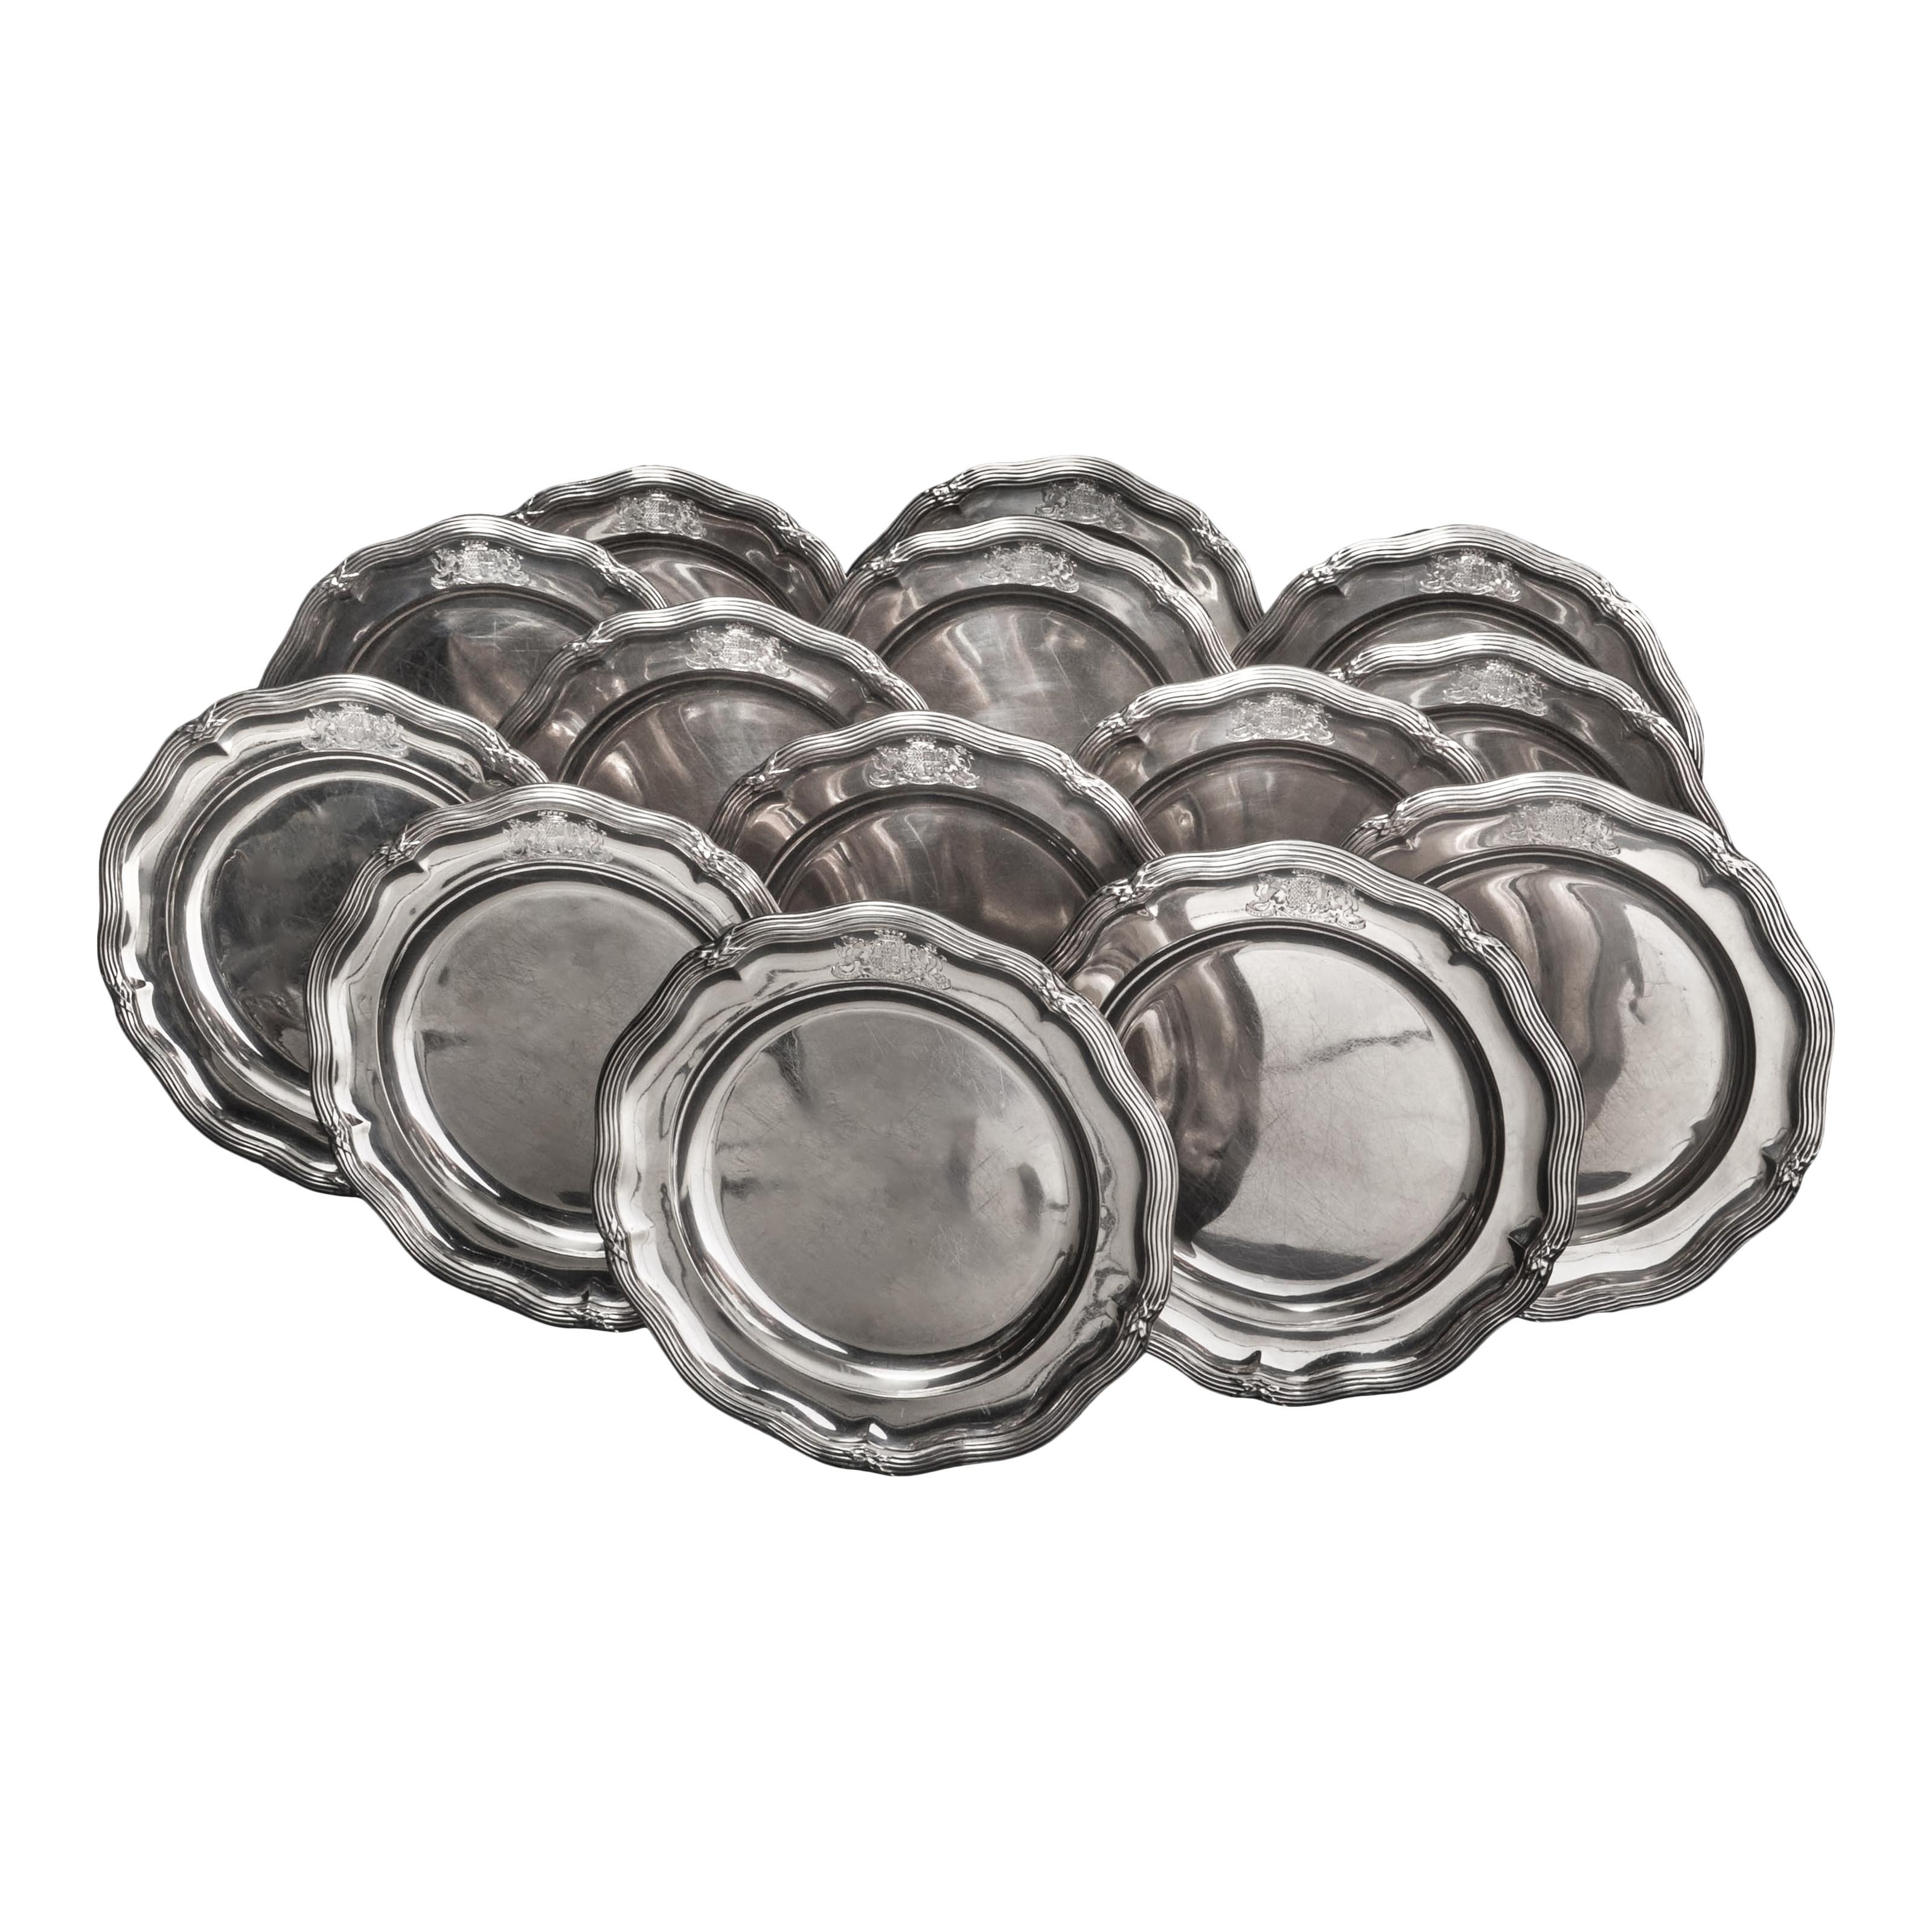 An incredibly rare set of 14 antique sterling silver Georgian plates, from the Estate of Edward Chichester 4th Marquess of Donegall and Duke of Belfast, Ireland, dated 1825. Weighing approximately 308 ounces of sterling silver.  
The plates were